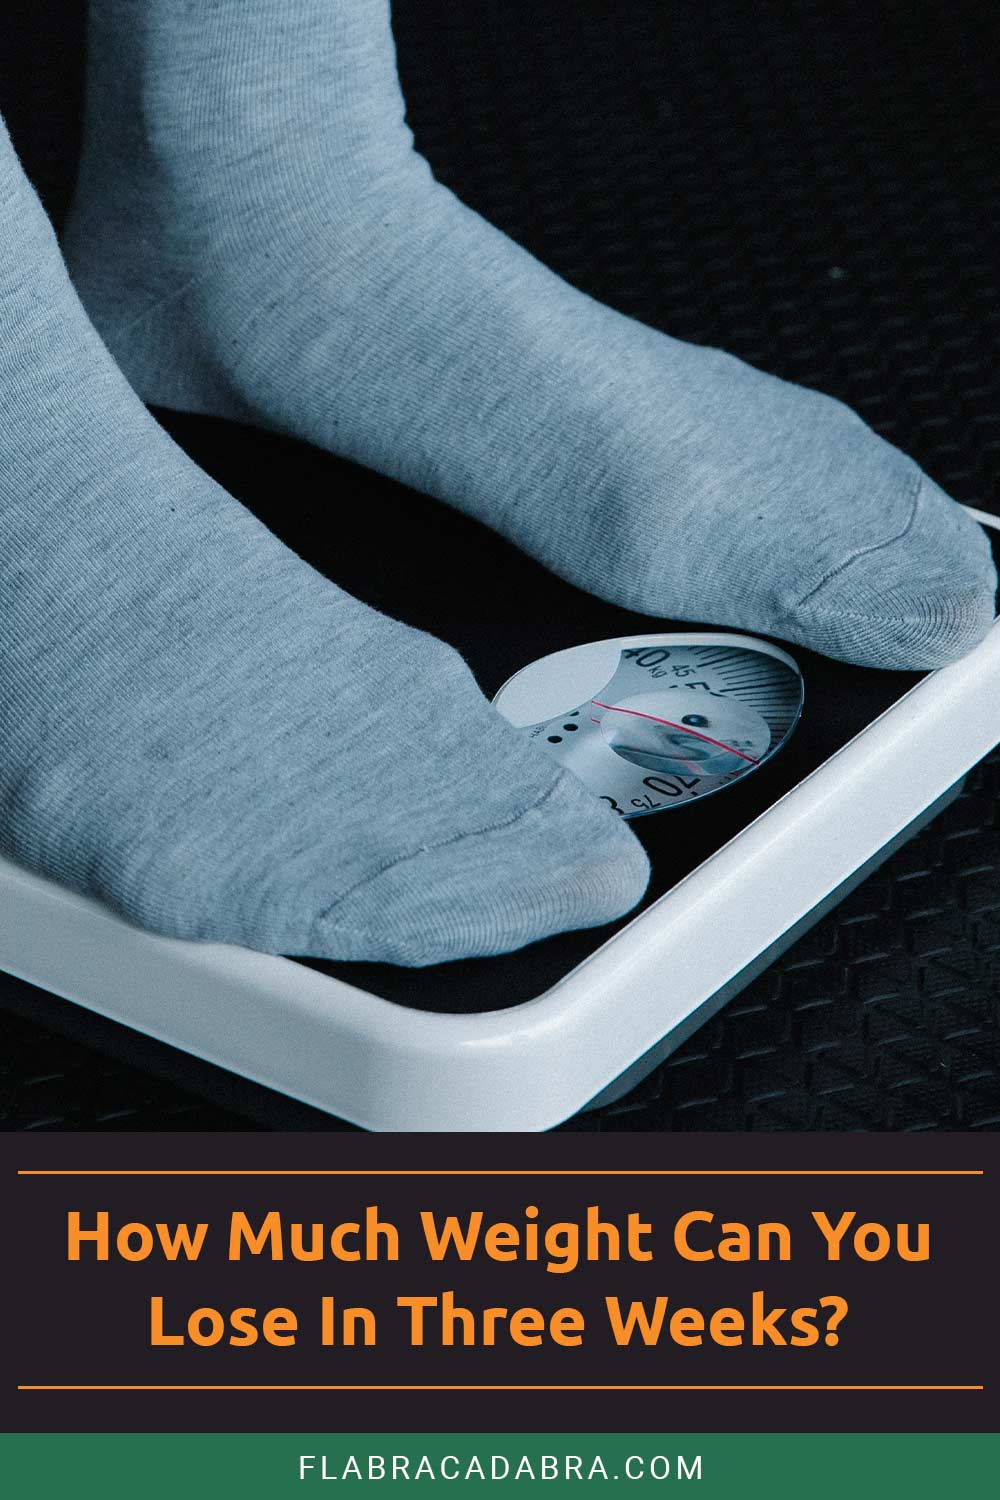 How Much Weight Can You Lose In Three Weeks?